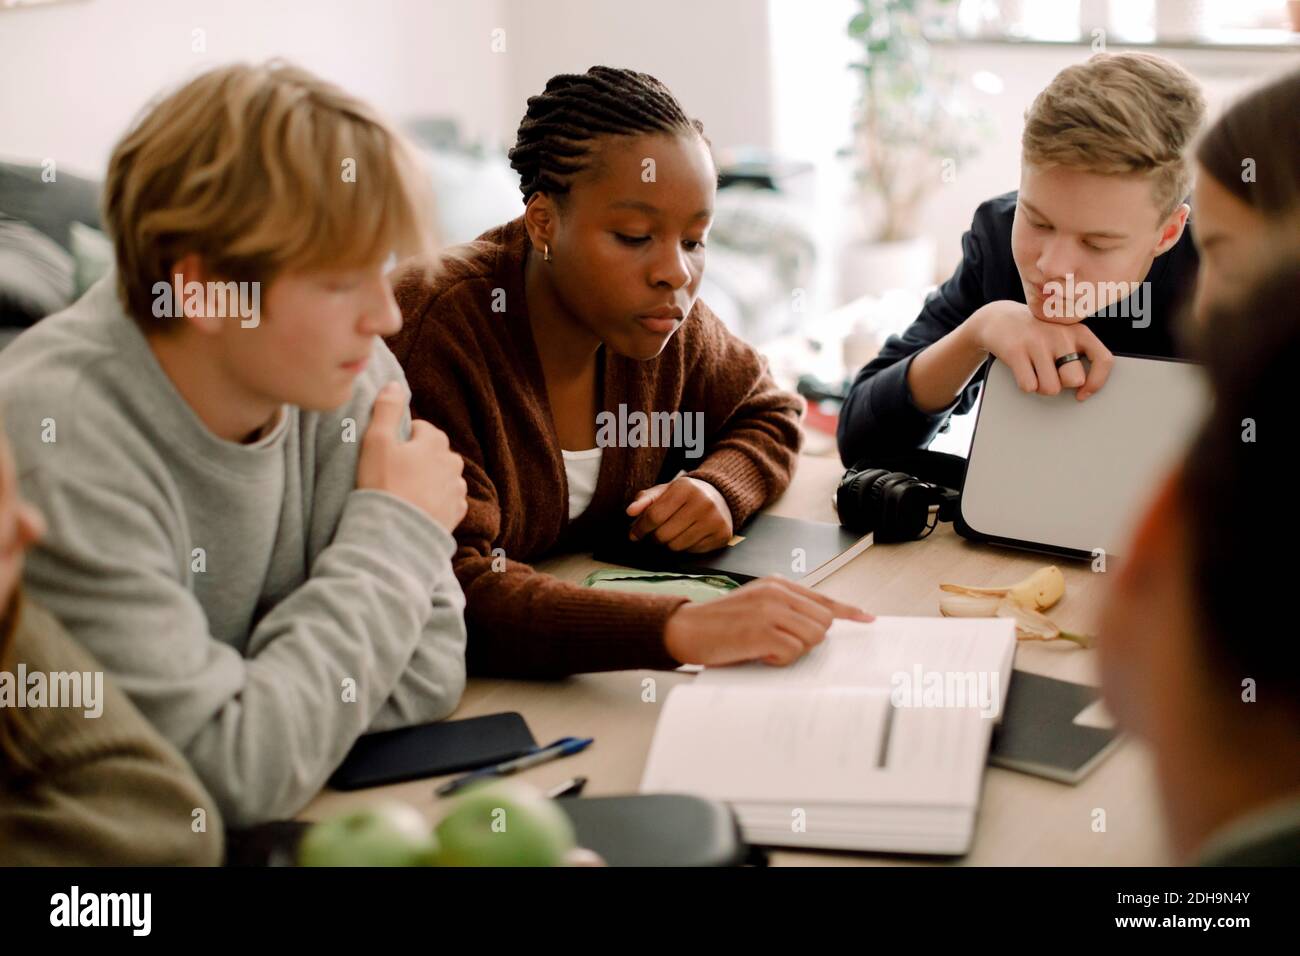 Teenage girls and boys studying together at table in living room Stock Photo